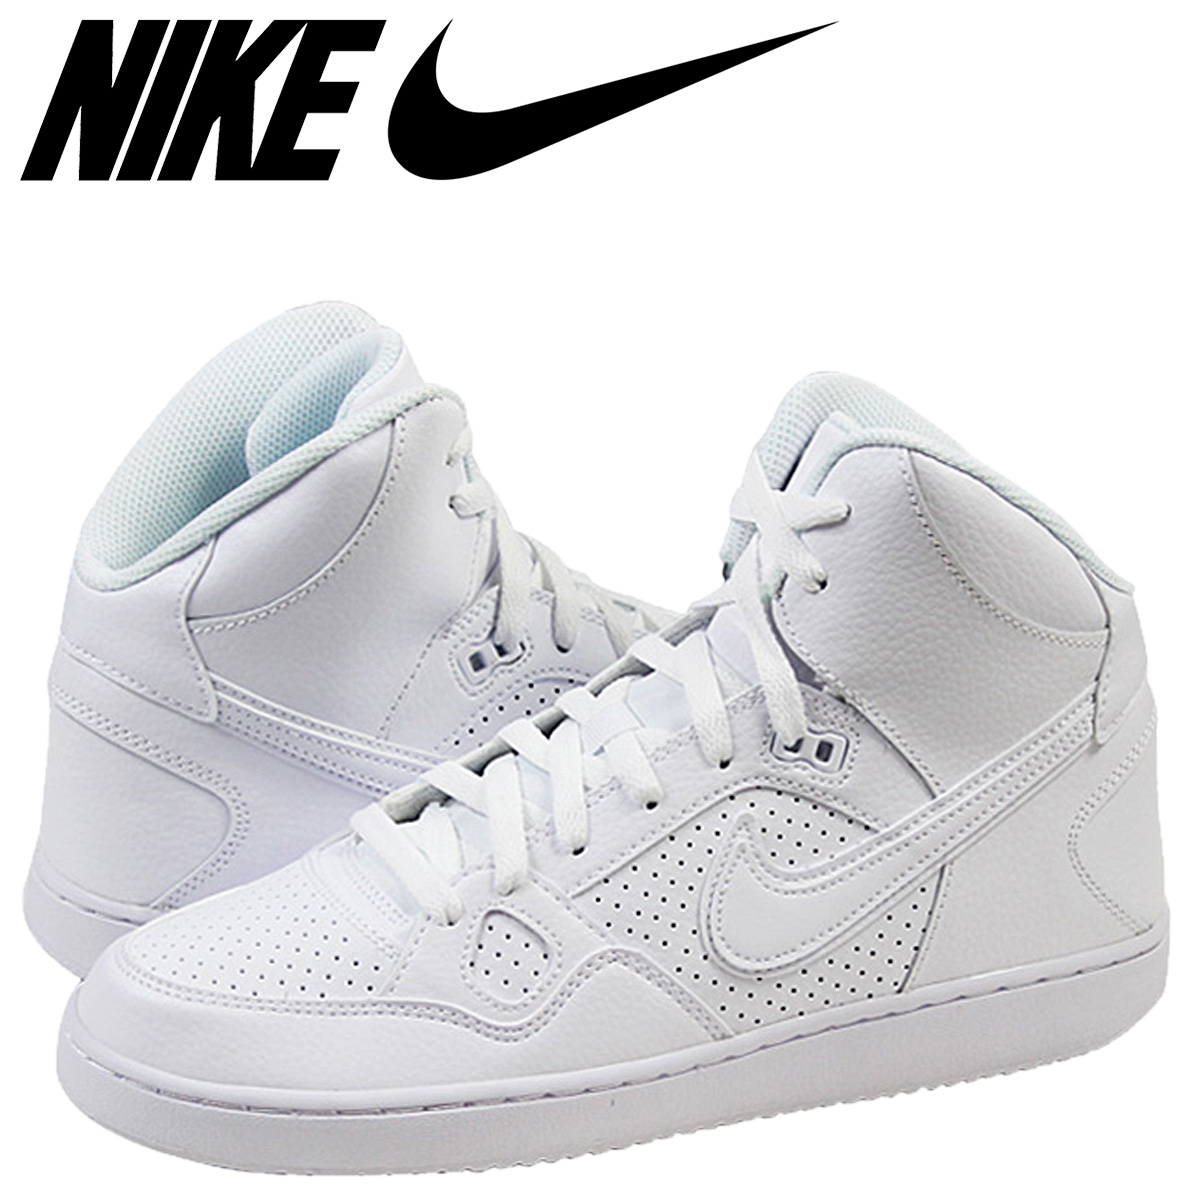 NIKE SON OF FORCE MID ナイキ サン 